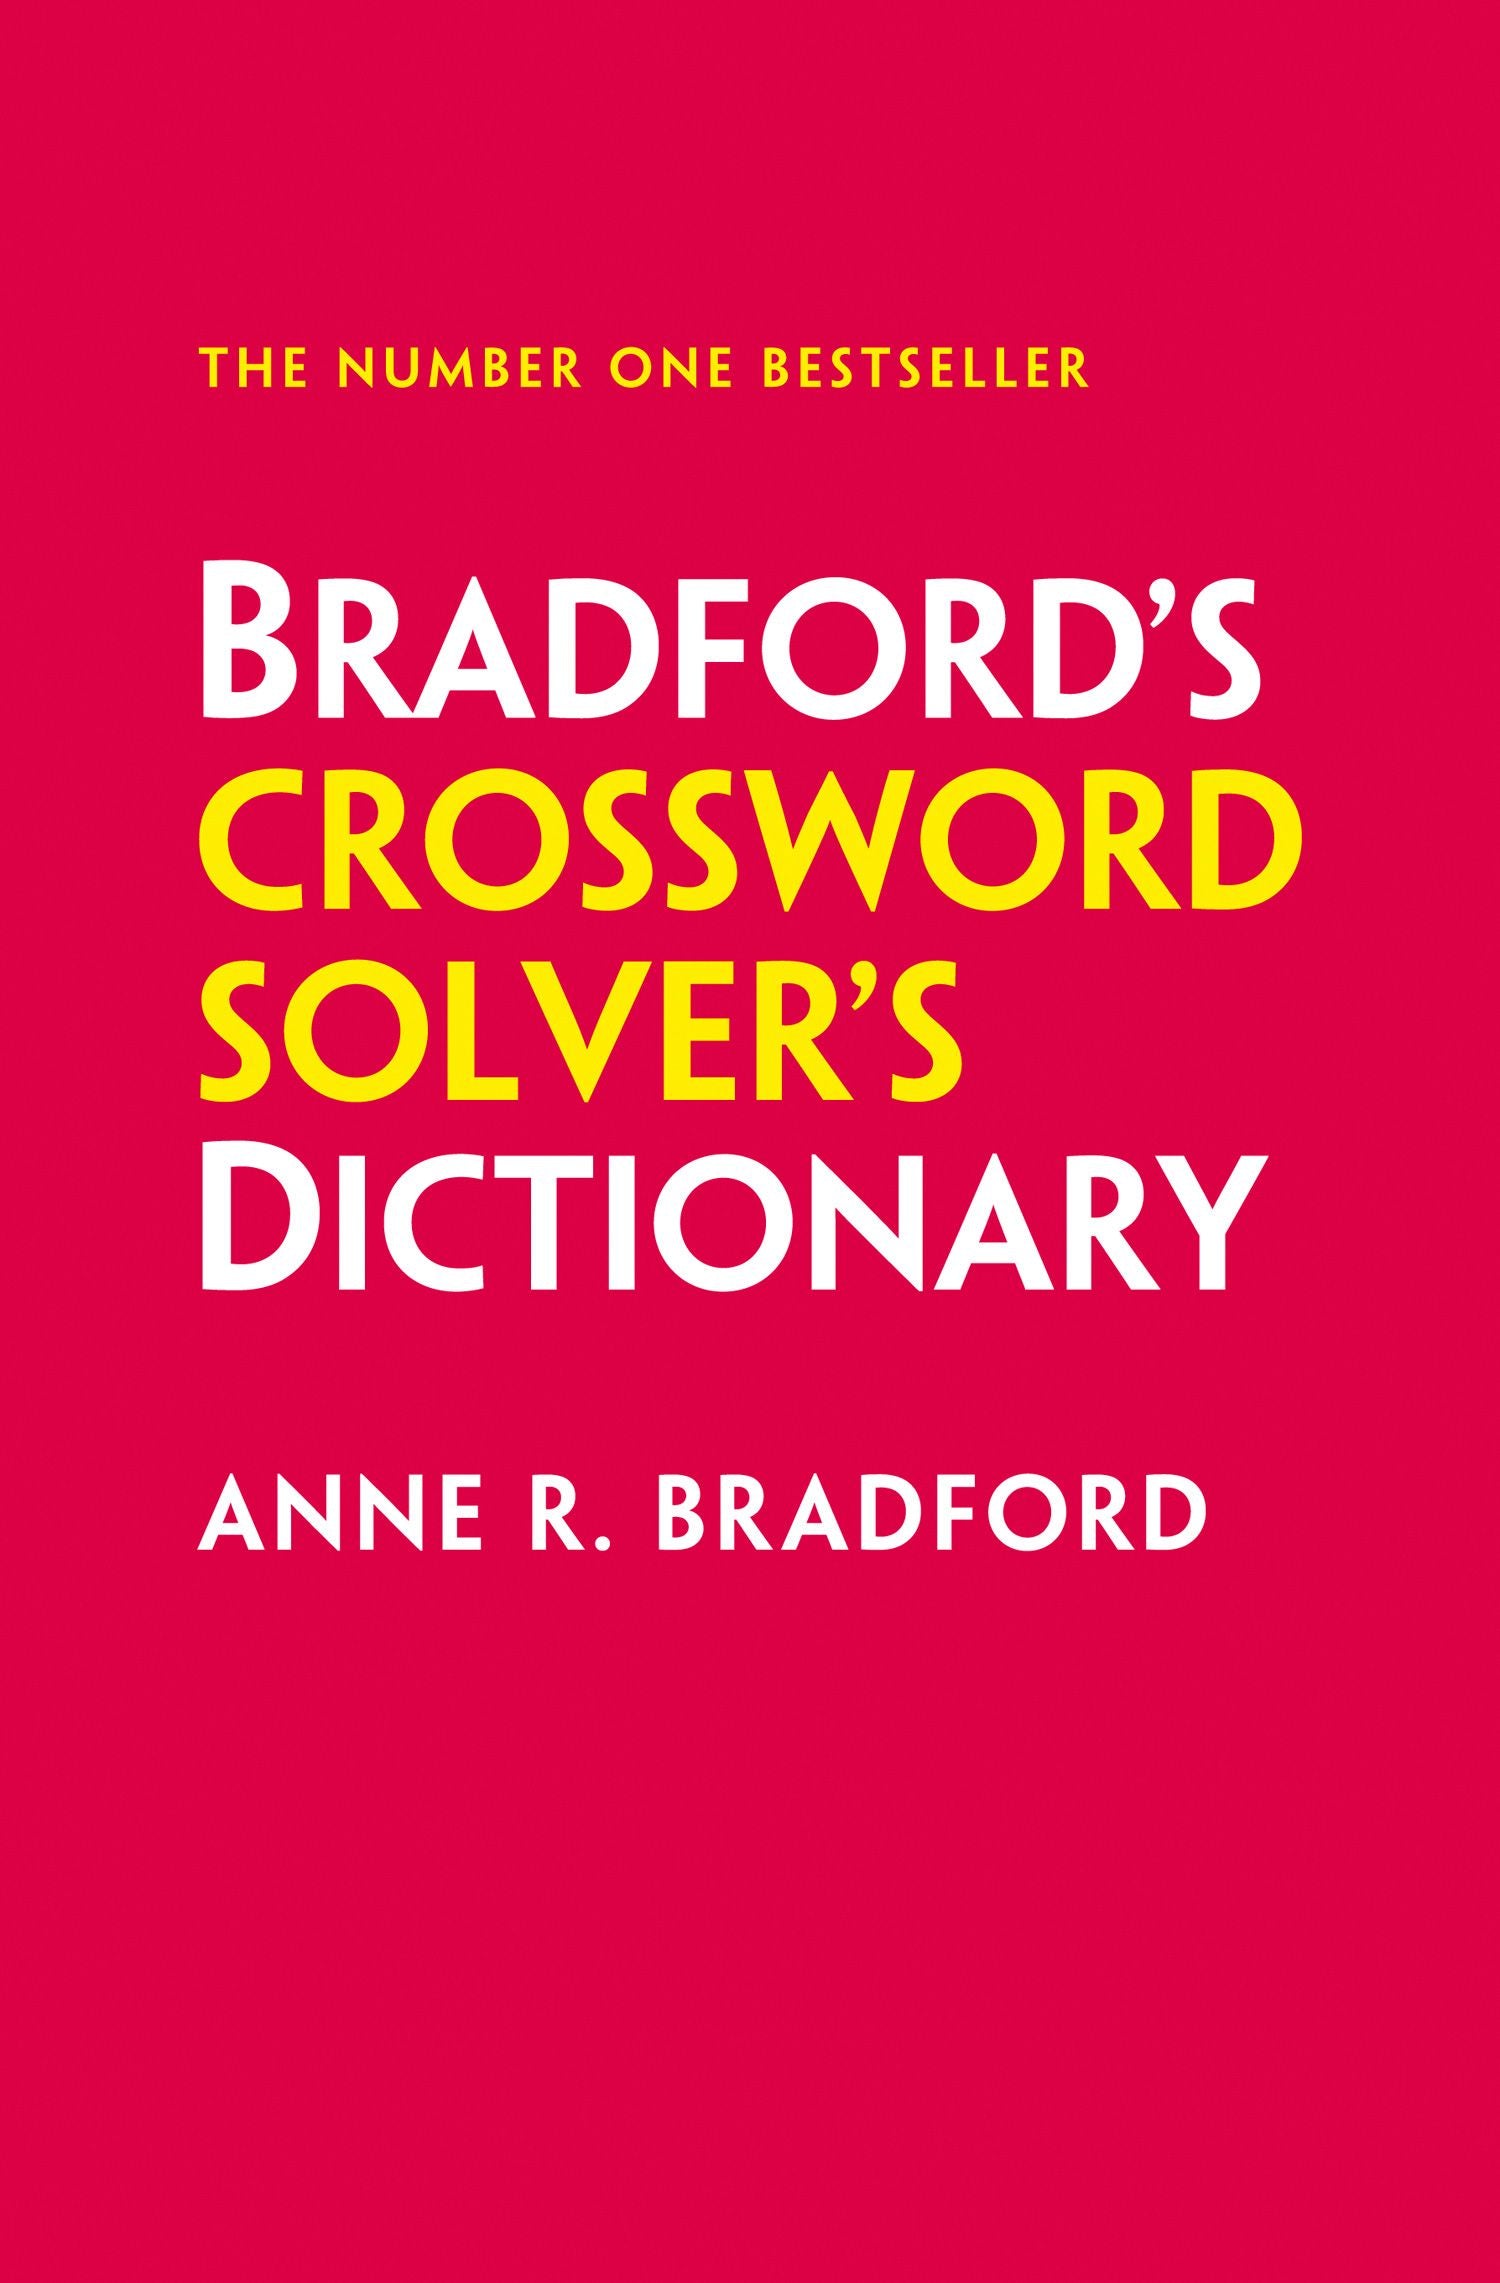 Bradford's Crossword Solver's Dictionary: More than 330,000 